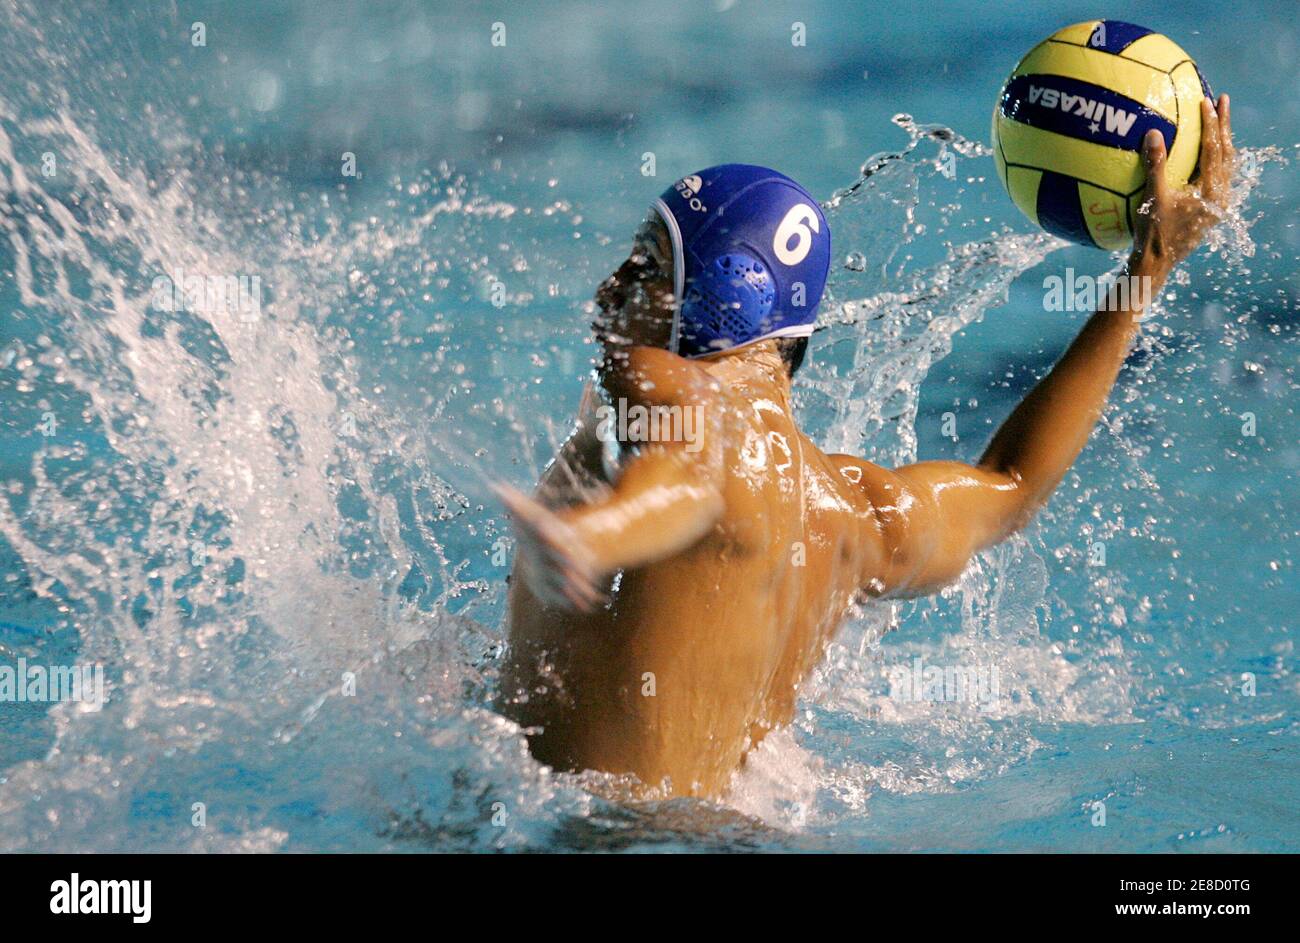 Jorge Antonio Lopez of Mexico shoots against Brazil during their men's  water polo match at the Pan American Games in Rio de Janeiro, Brazil July  23, 2007. REUTERS/Sergio Moraes (BRAZIL Stock Photo -